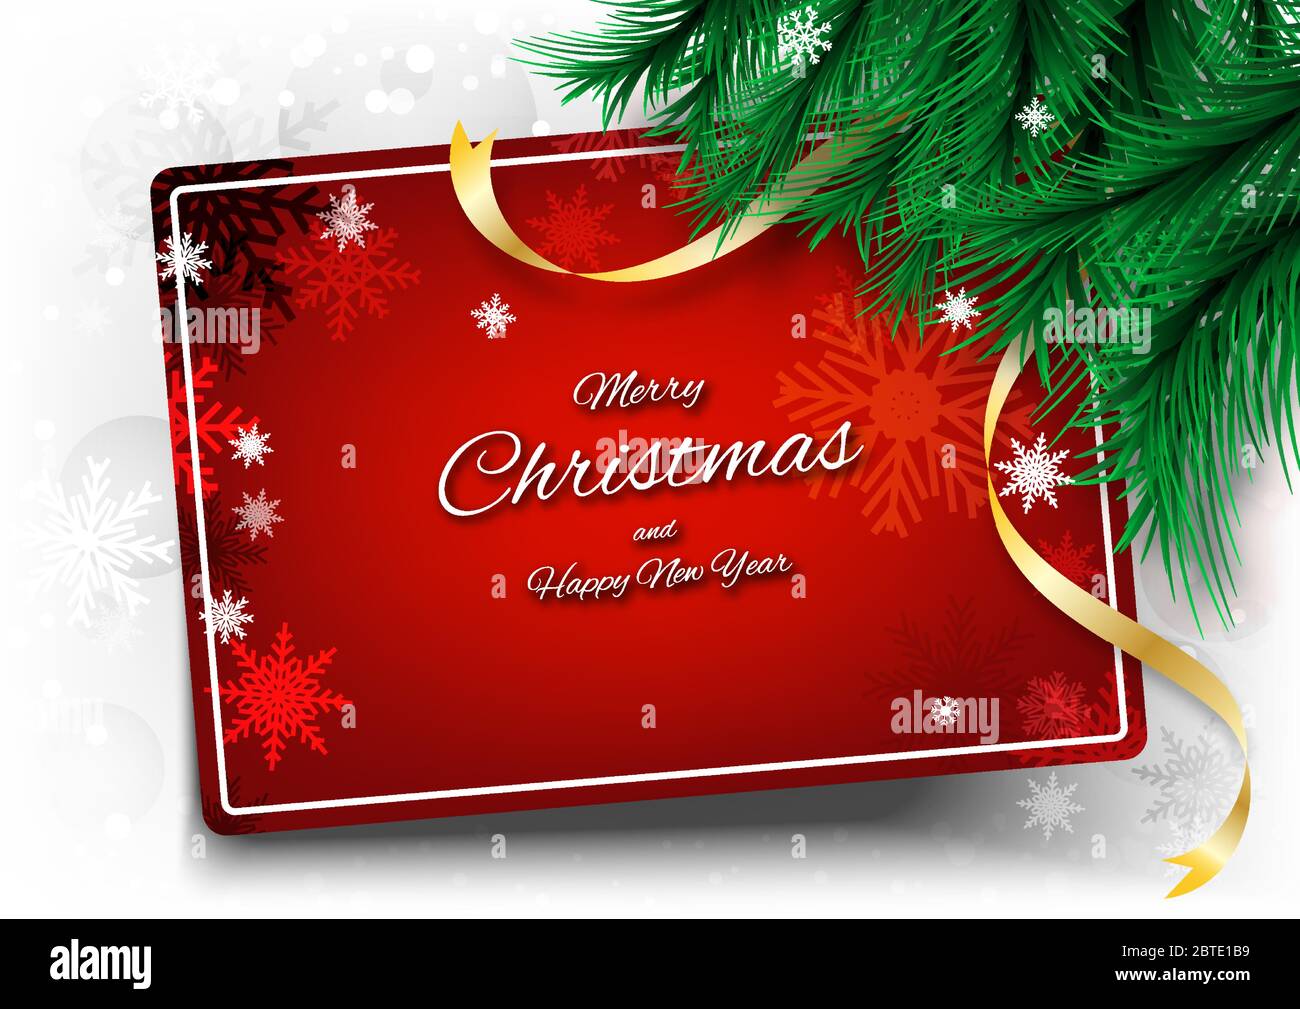 Merry Christmas background with frame text and ribbon elements. Background decoration with festive celebration for holidays. Stock Vector